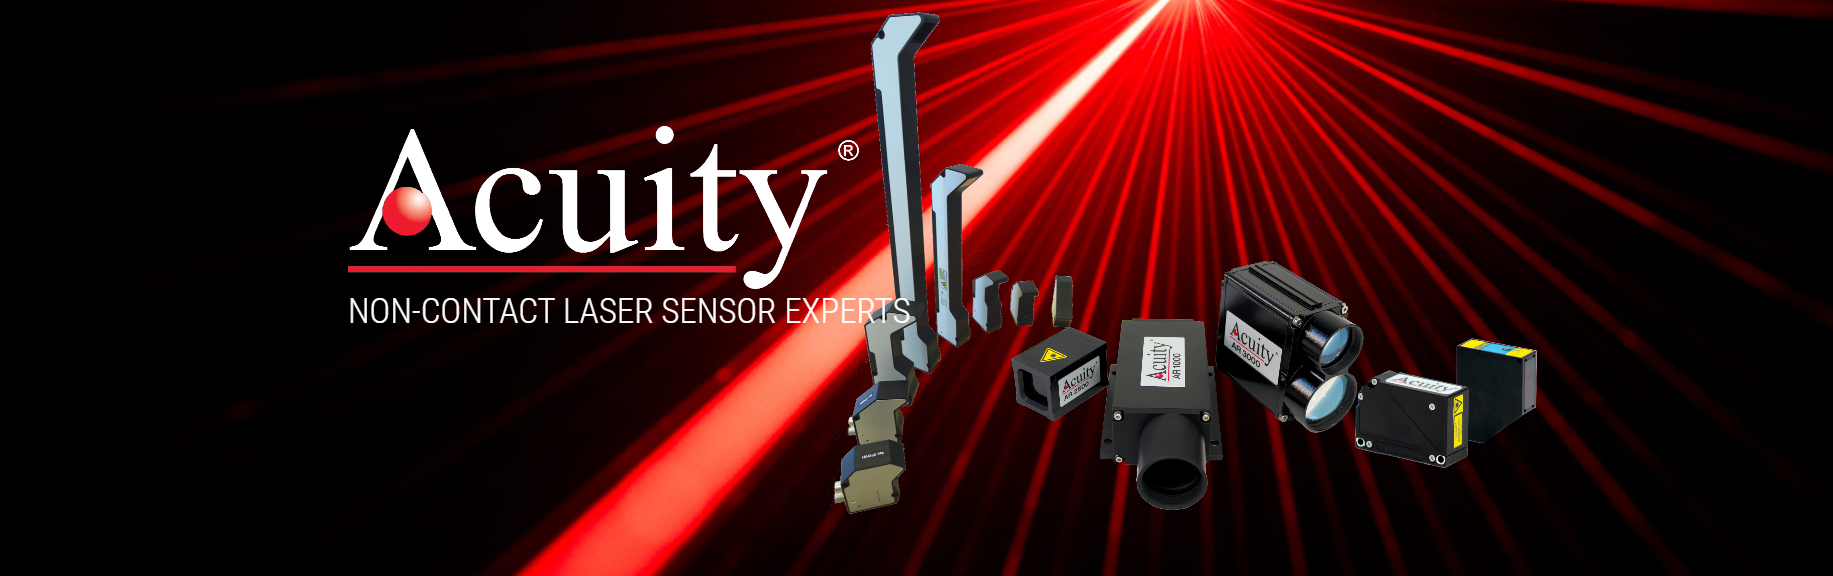 Acuity Laser